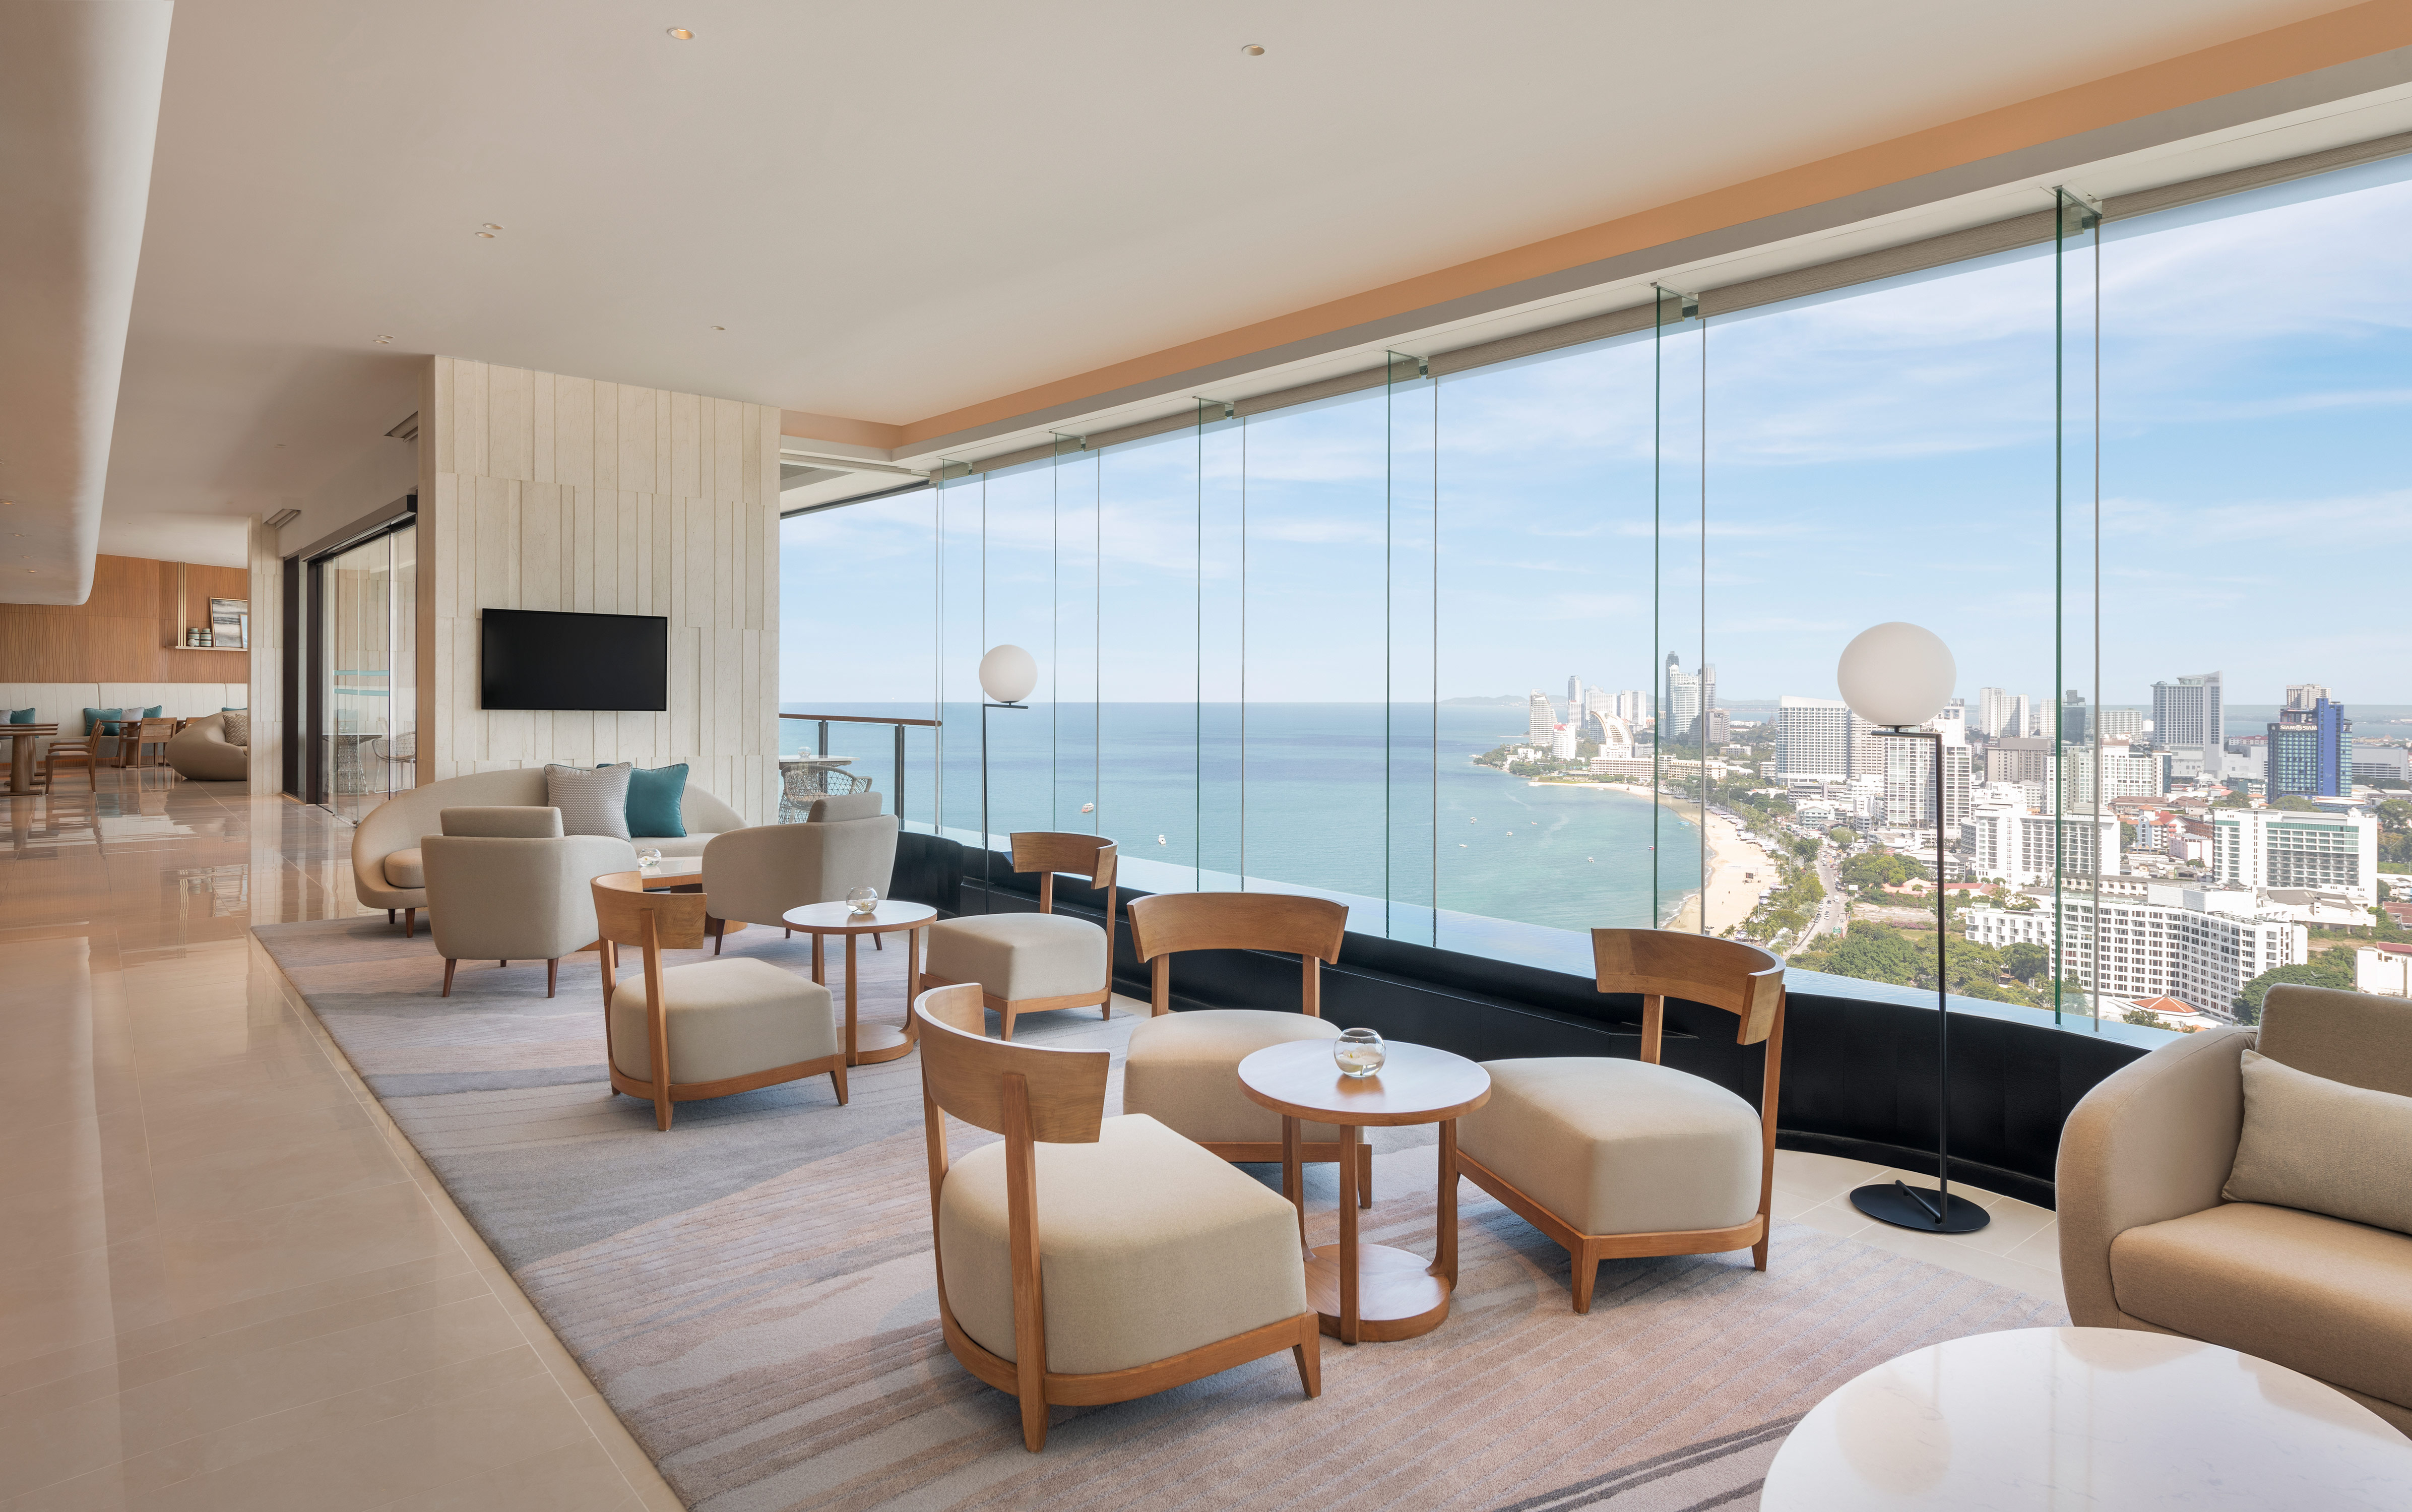 Executive Lounge with Views of the City and the Bay